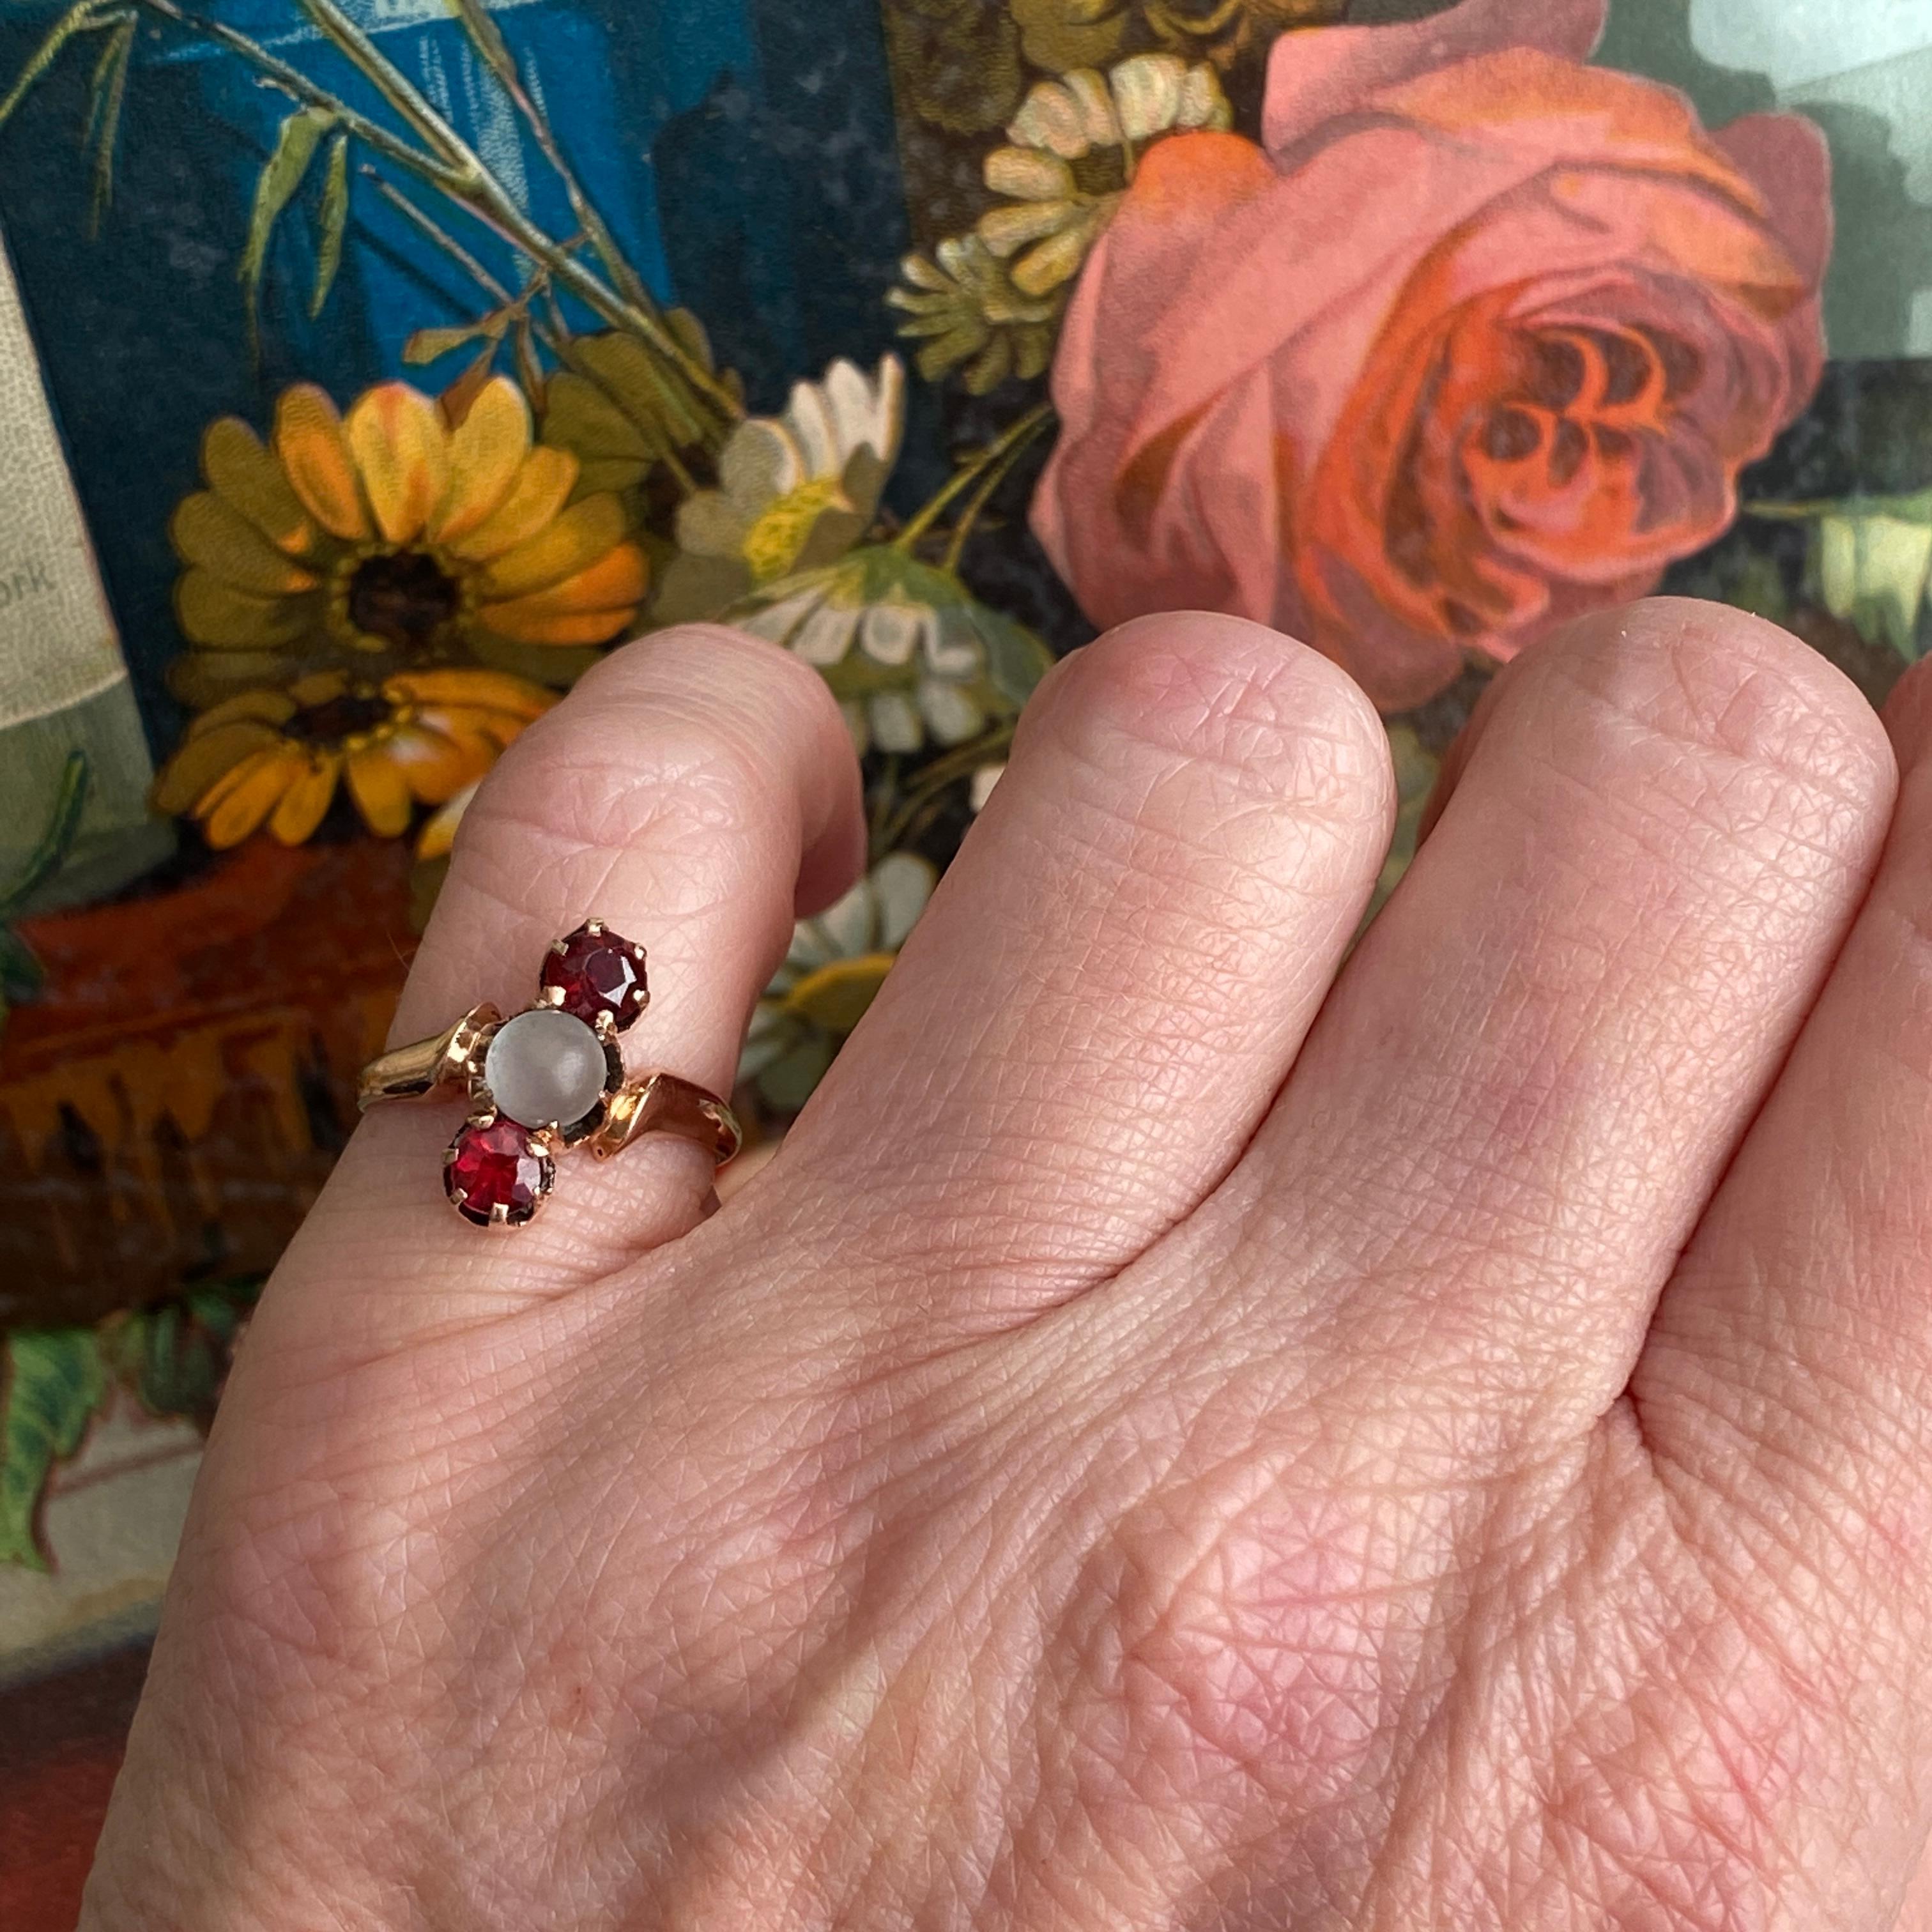 Details:
Super sweet Victorian ring with moonstone and red garnets. Classic three stone setting with lots of character. The red on the garnets is a nice pretty true red! The ring is 14K rose gold, and has a smooth shoulders. There is 1—5mm orb